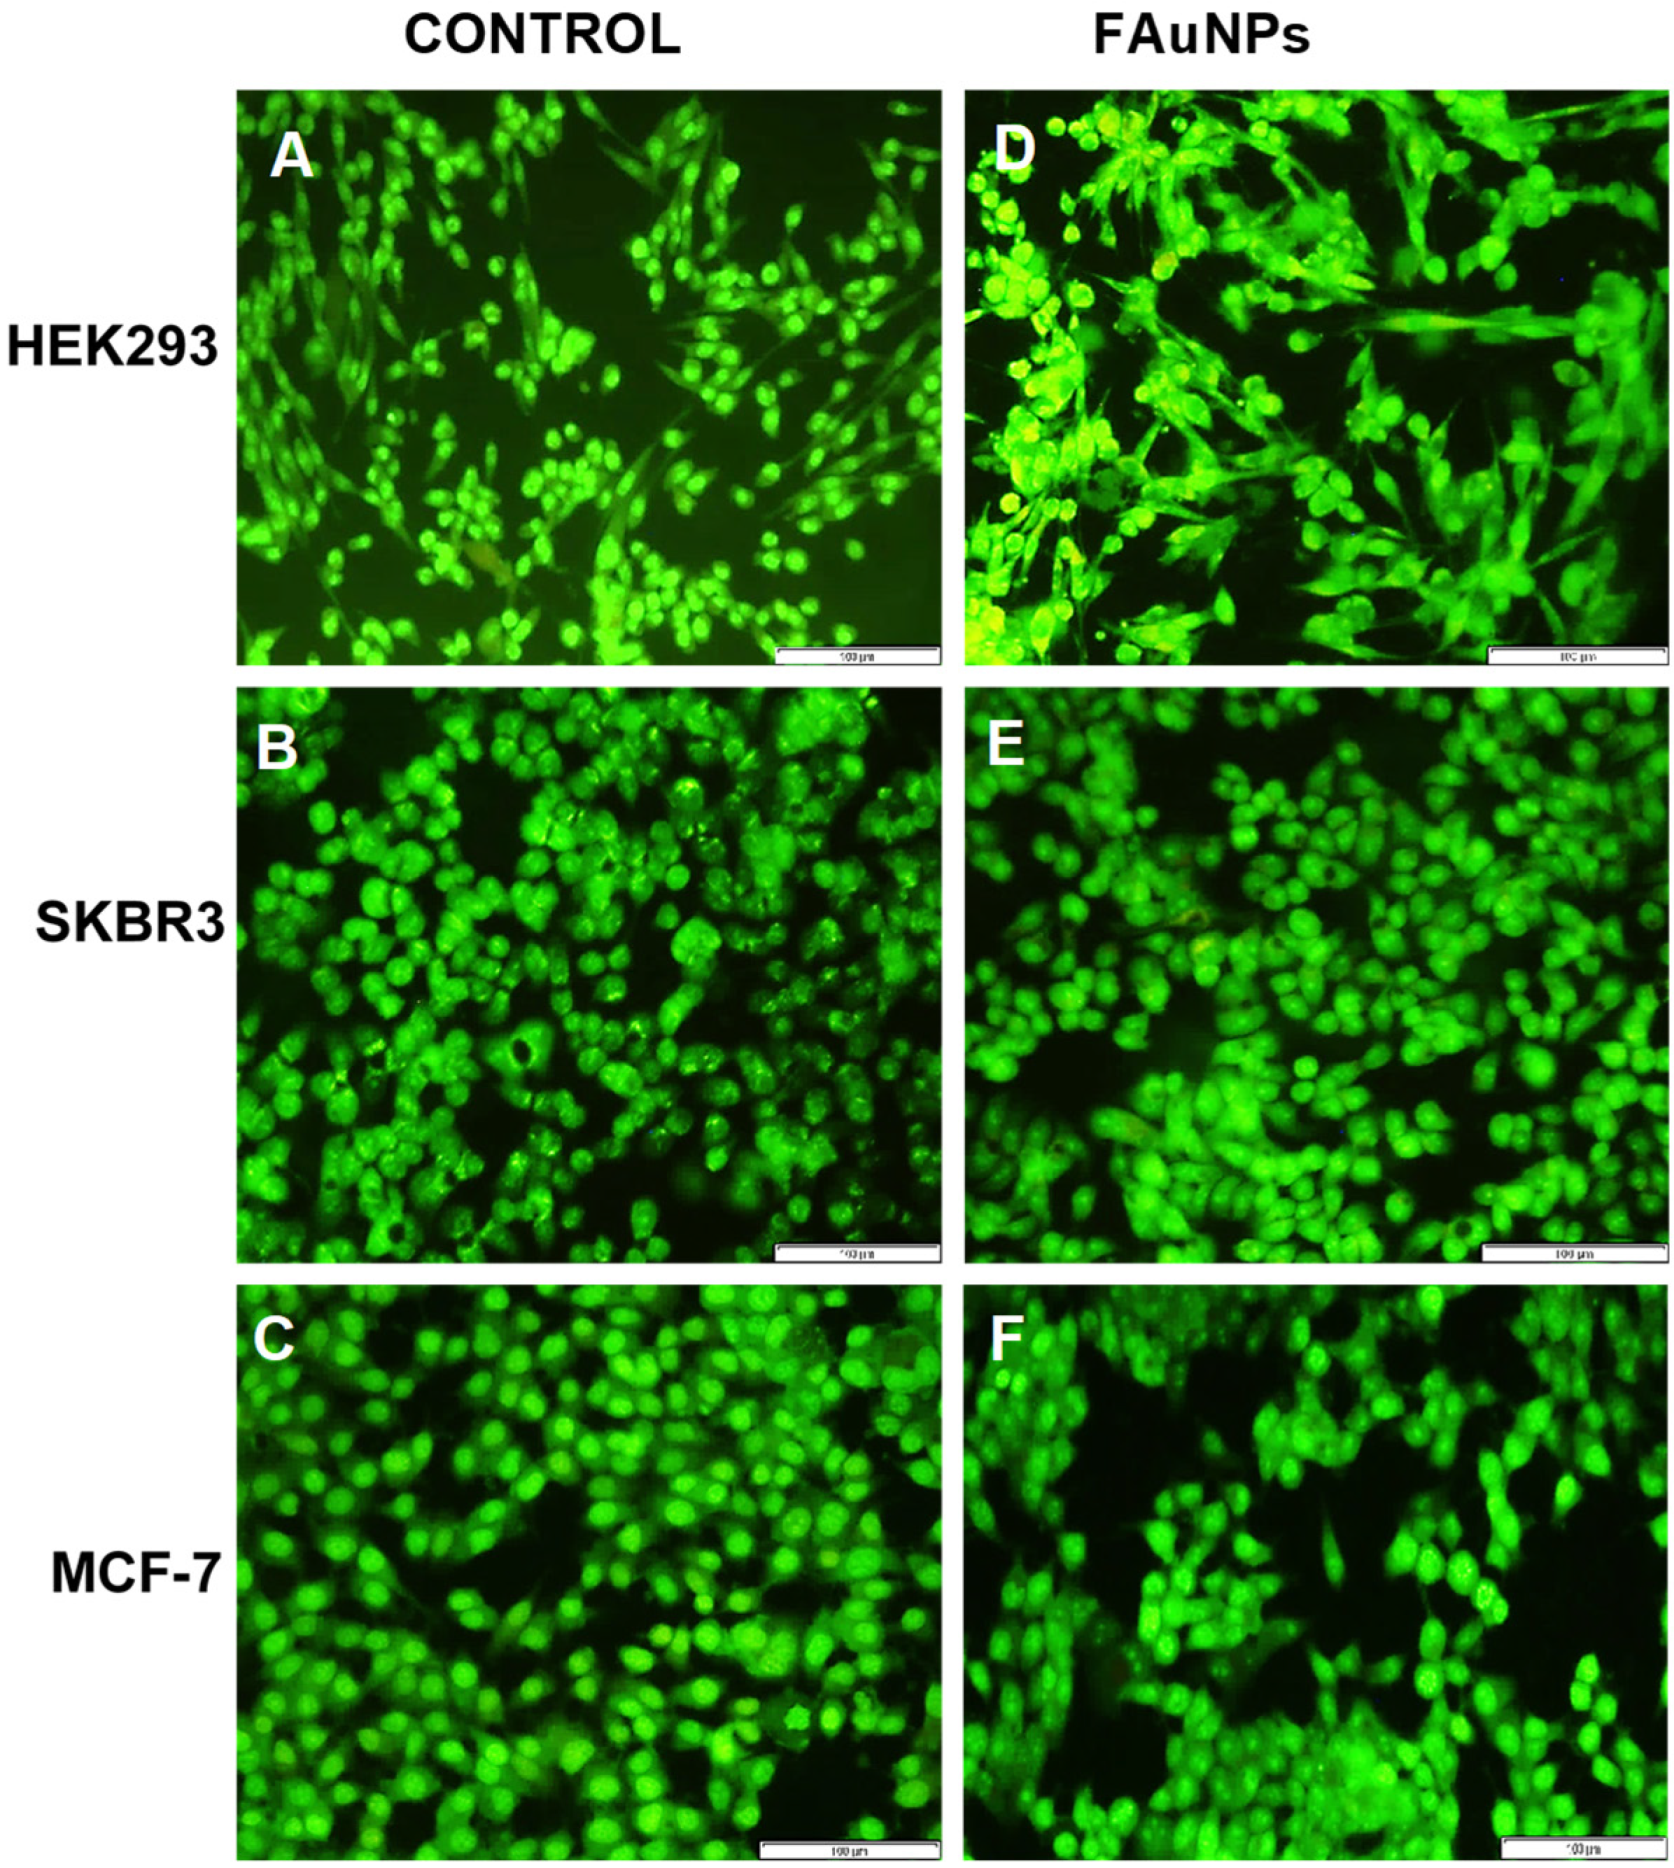 Fluorescent images from the acridine orange/ethidium bromide apoptosis assay in the HEK293, SKBR3 and MCF-7 cell lines at 20× magnification. Control = untreated (A) HEK293 (B) SKBR3 and (C) MCF-7 cells. FAuNP treated cells (D) HEK293 cells with Au-CS at the suboptimum ratio, (E) SKBR3 cells with Au-CS-FA-His at the supraoptimum ratio and (F) MCF-7 cells with Au-CS at the optimum ratio. Scale bar = 100 µm.